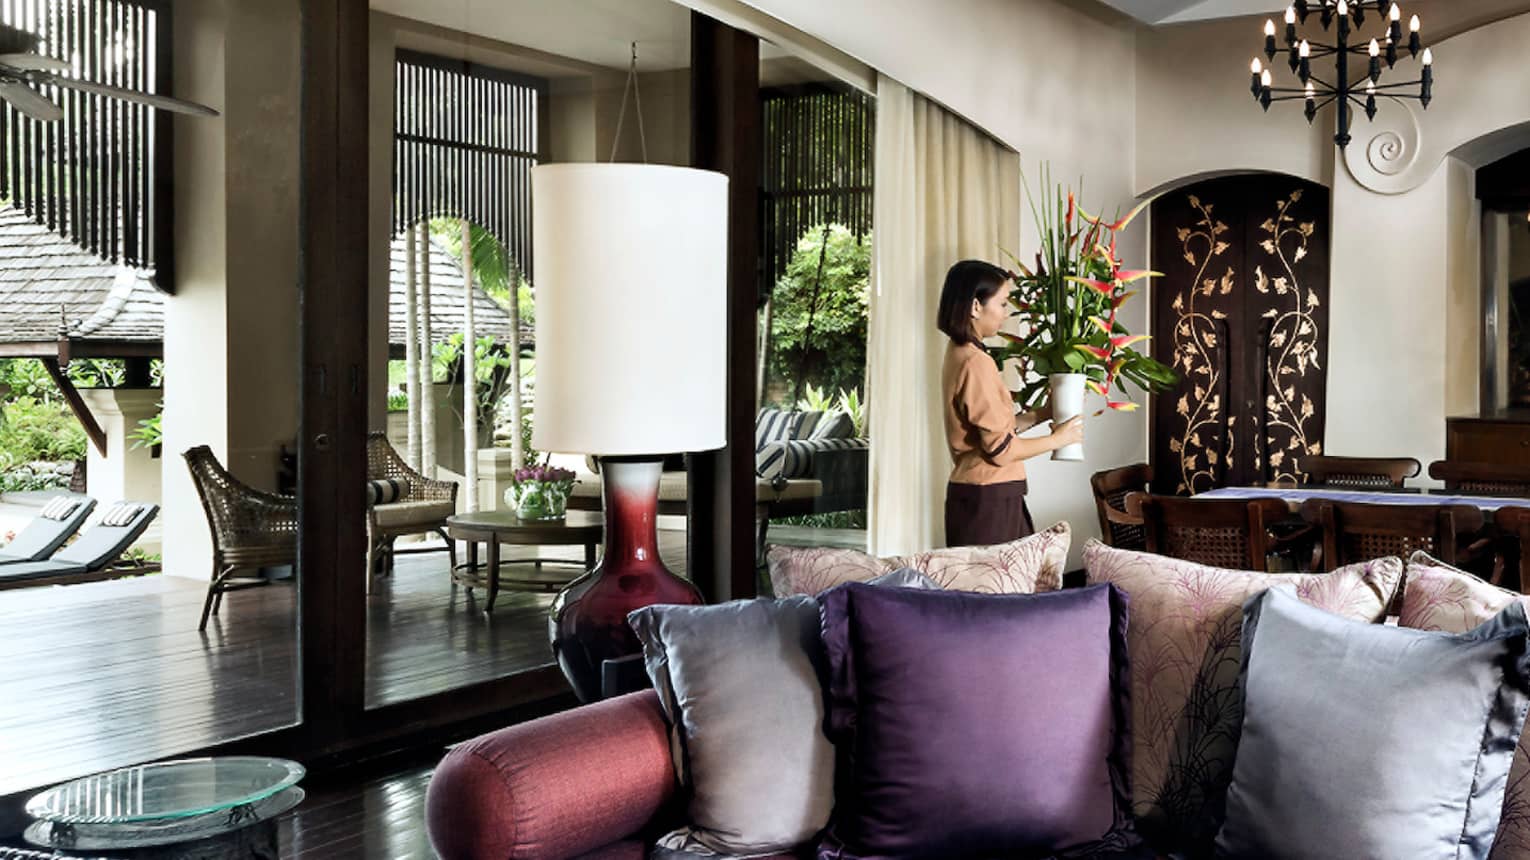 Hotel staff carries vase with tall tropical flowers past sofa, table in residence living room